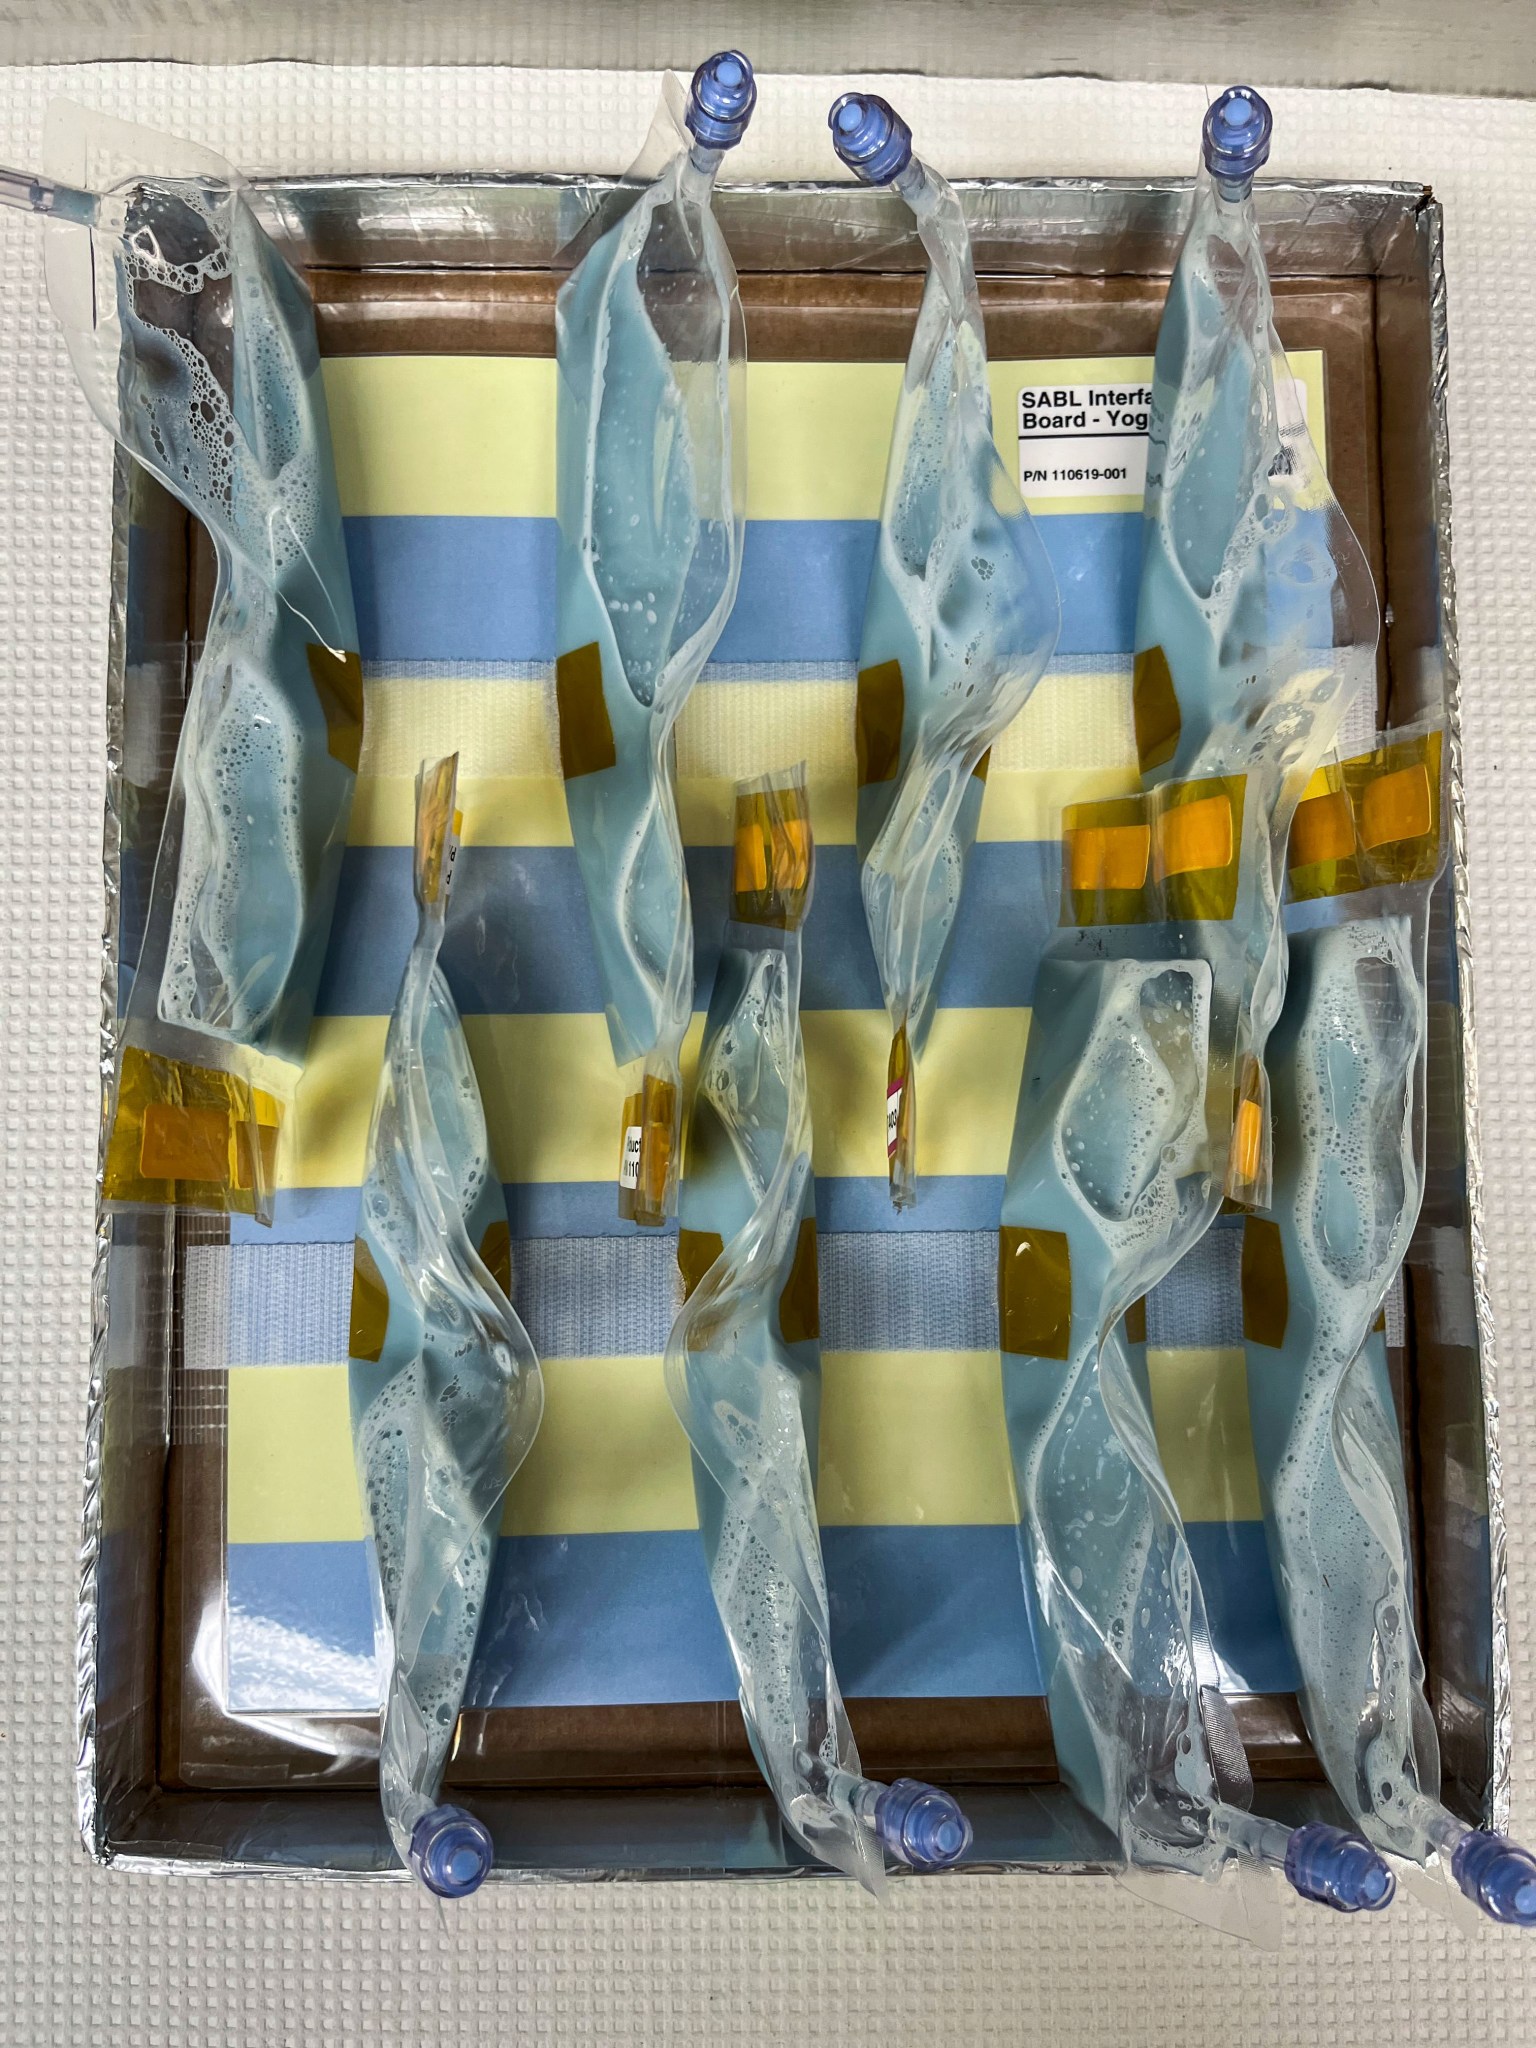 Preflight image of BioNutrients-2 Yogurt Bags. The blue color of their contents comes from the pH Indicator, and the SABL interface board behind the bags provides a reference for the starting and ending colors.